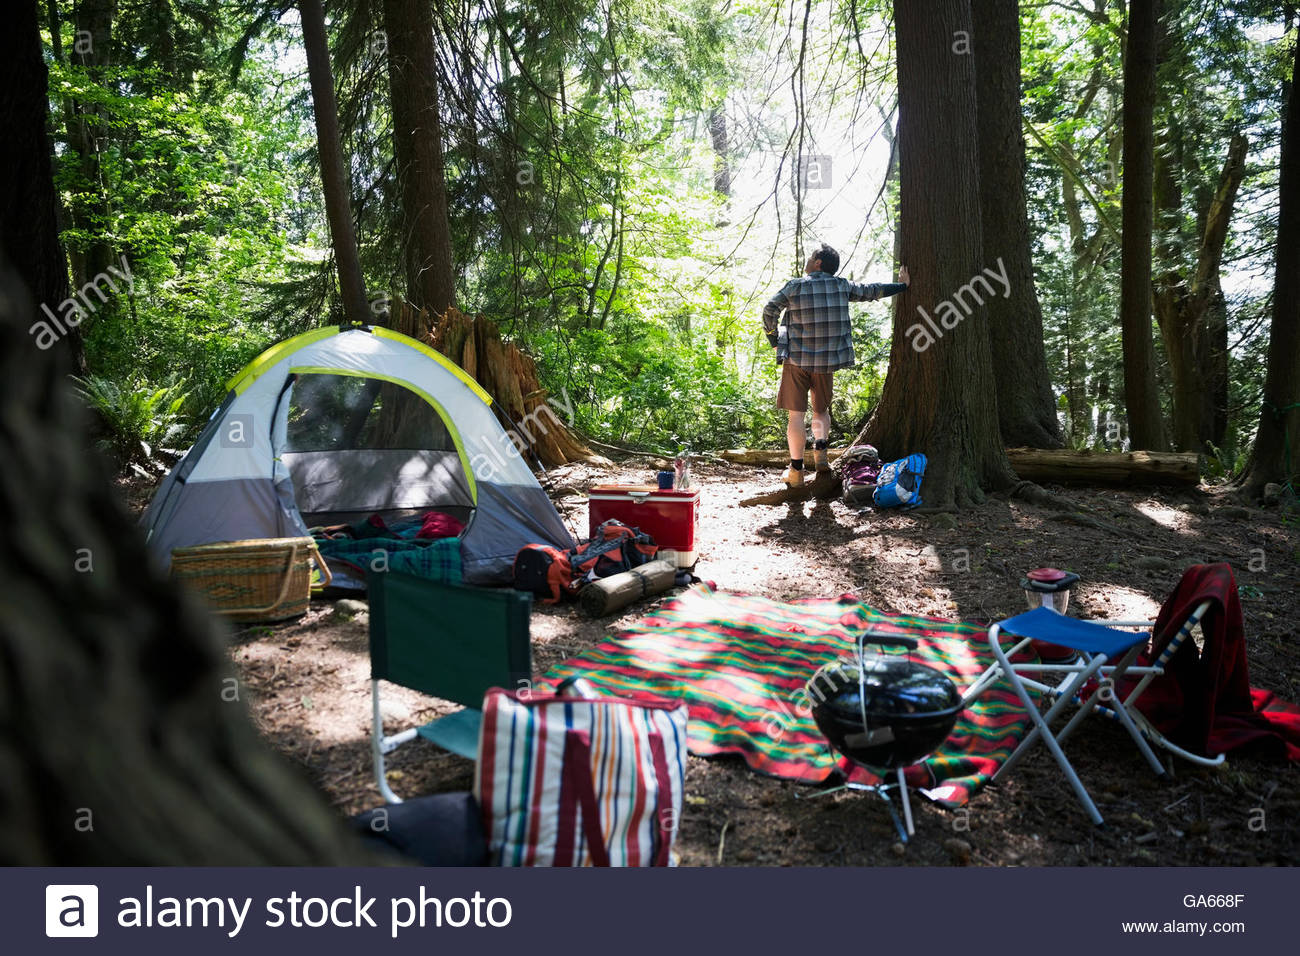 Man leaning on tree looking up at campsite Stock Photo